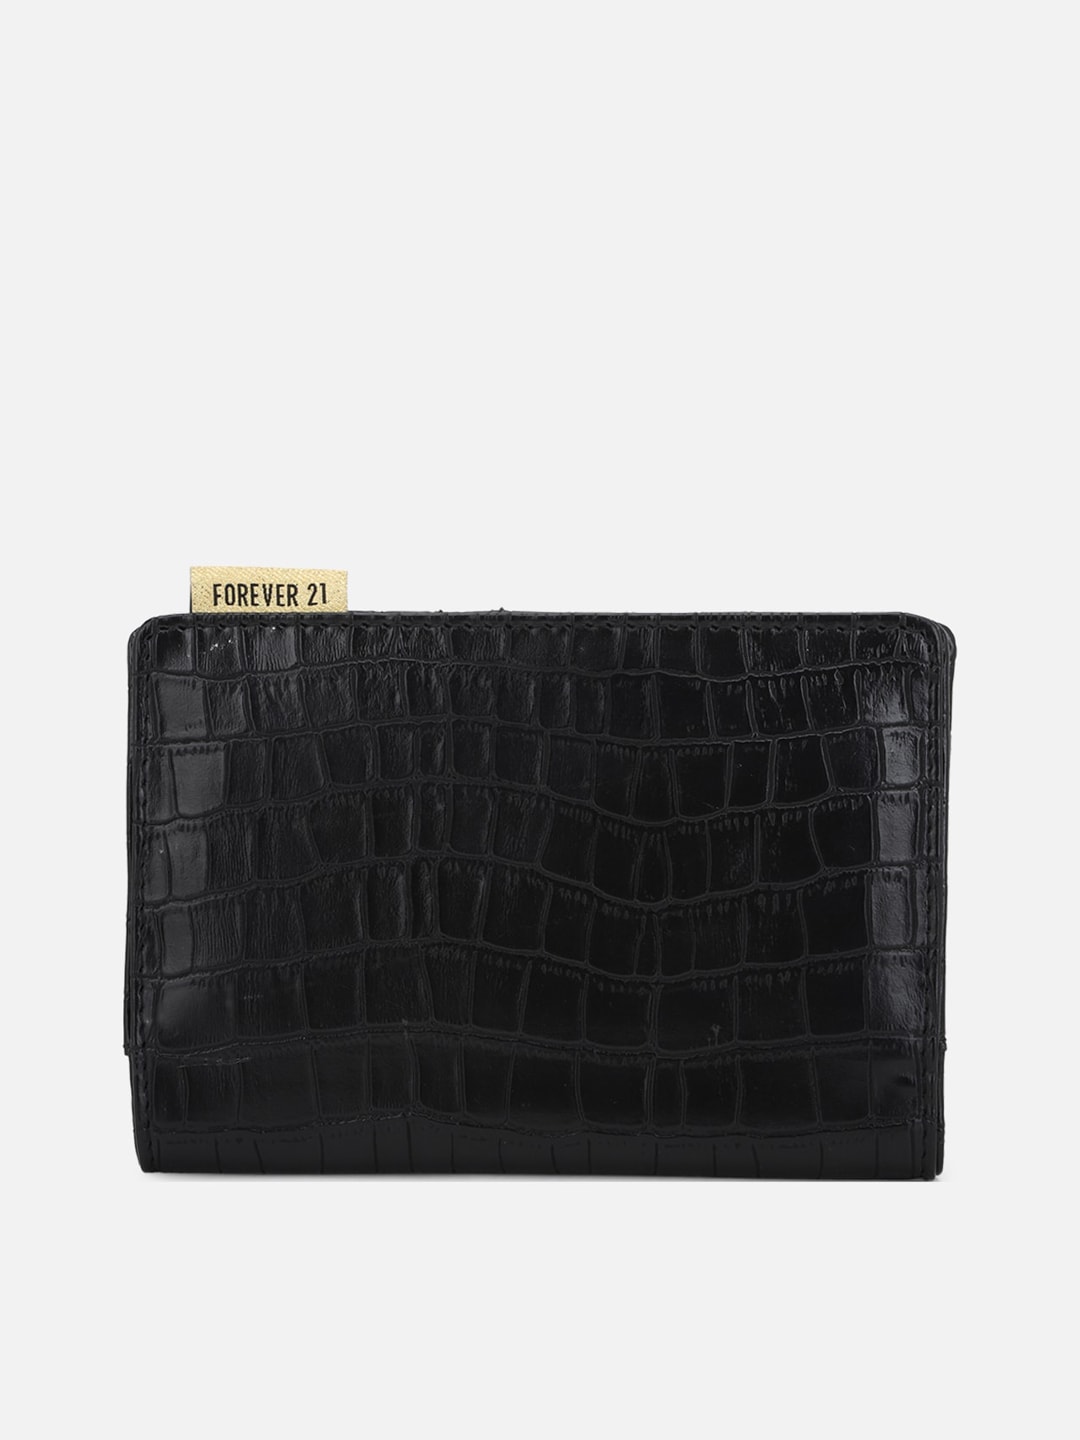 FOREVER 21 Black Animal Textured PU Swagger Sling Bag Price in India